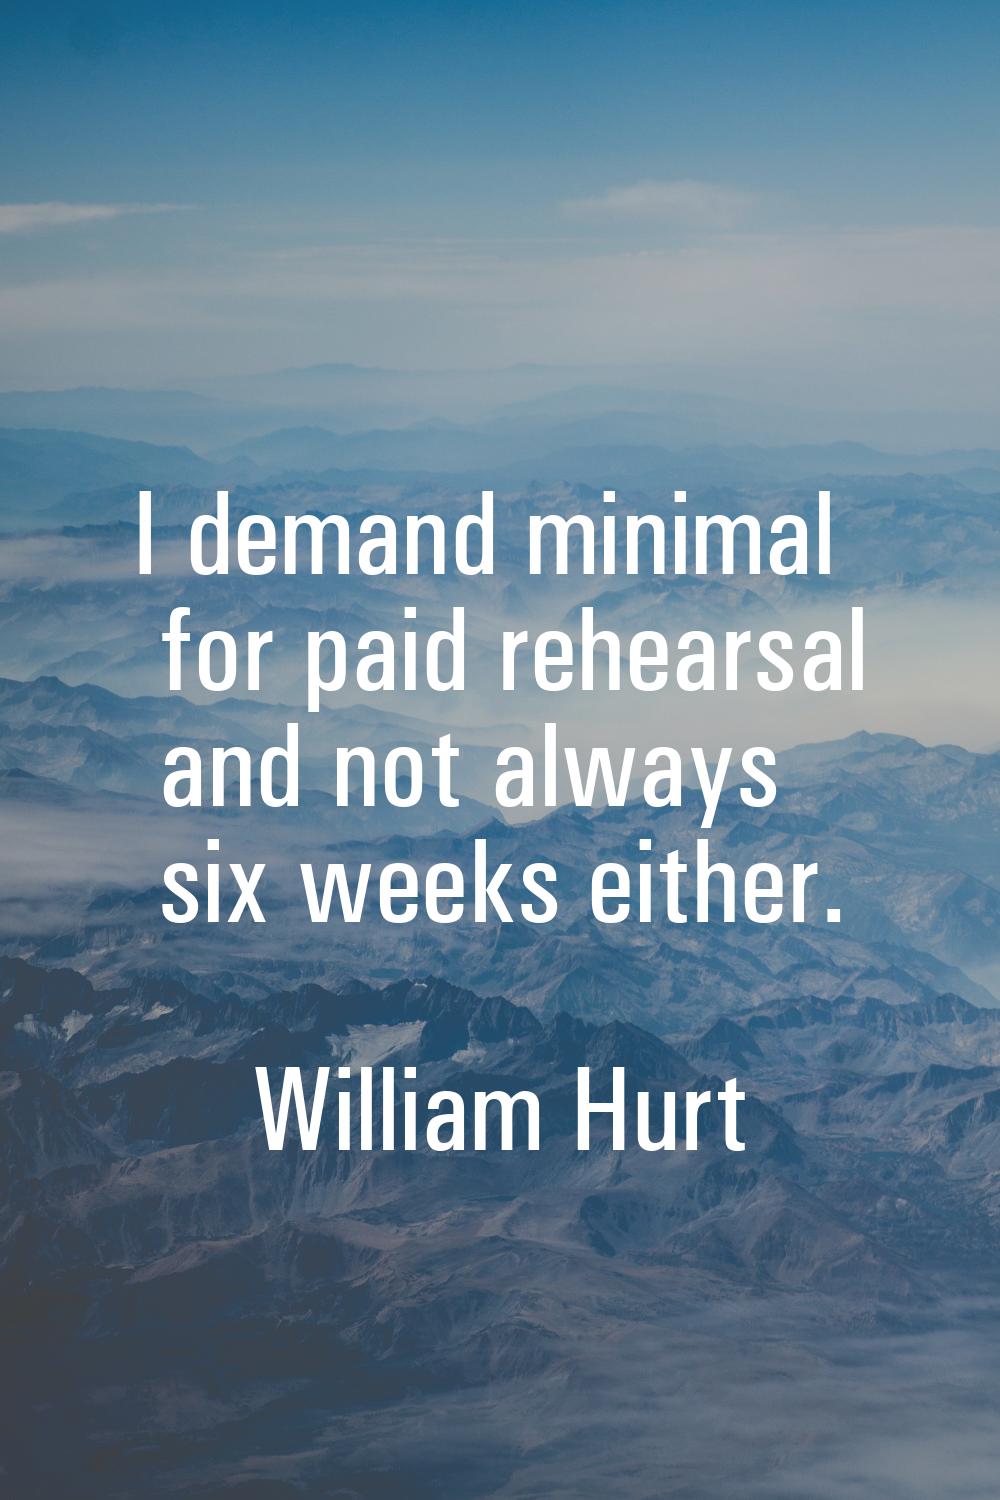 I demand minimal for paid rehearsal and not always six weeks either.